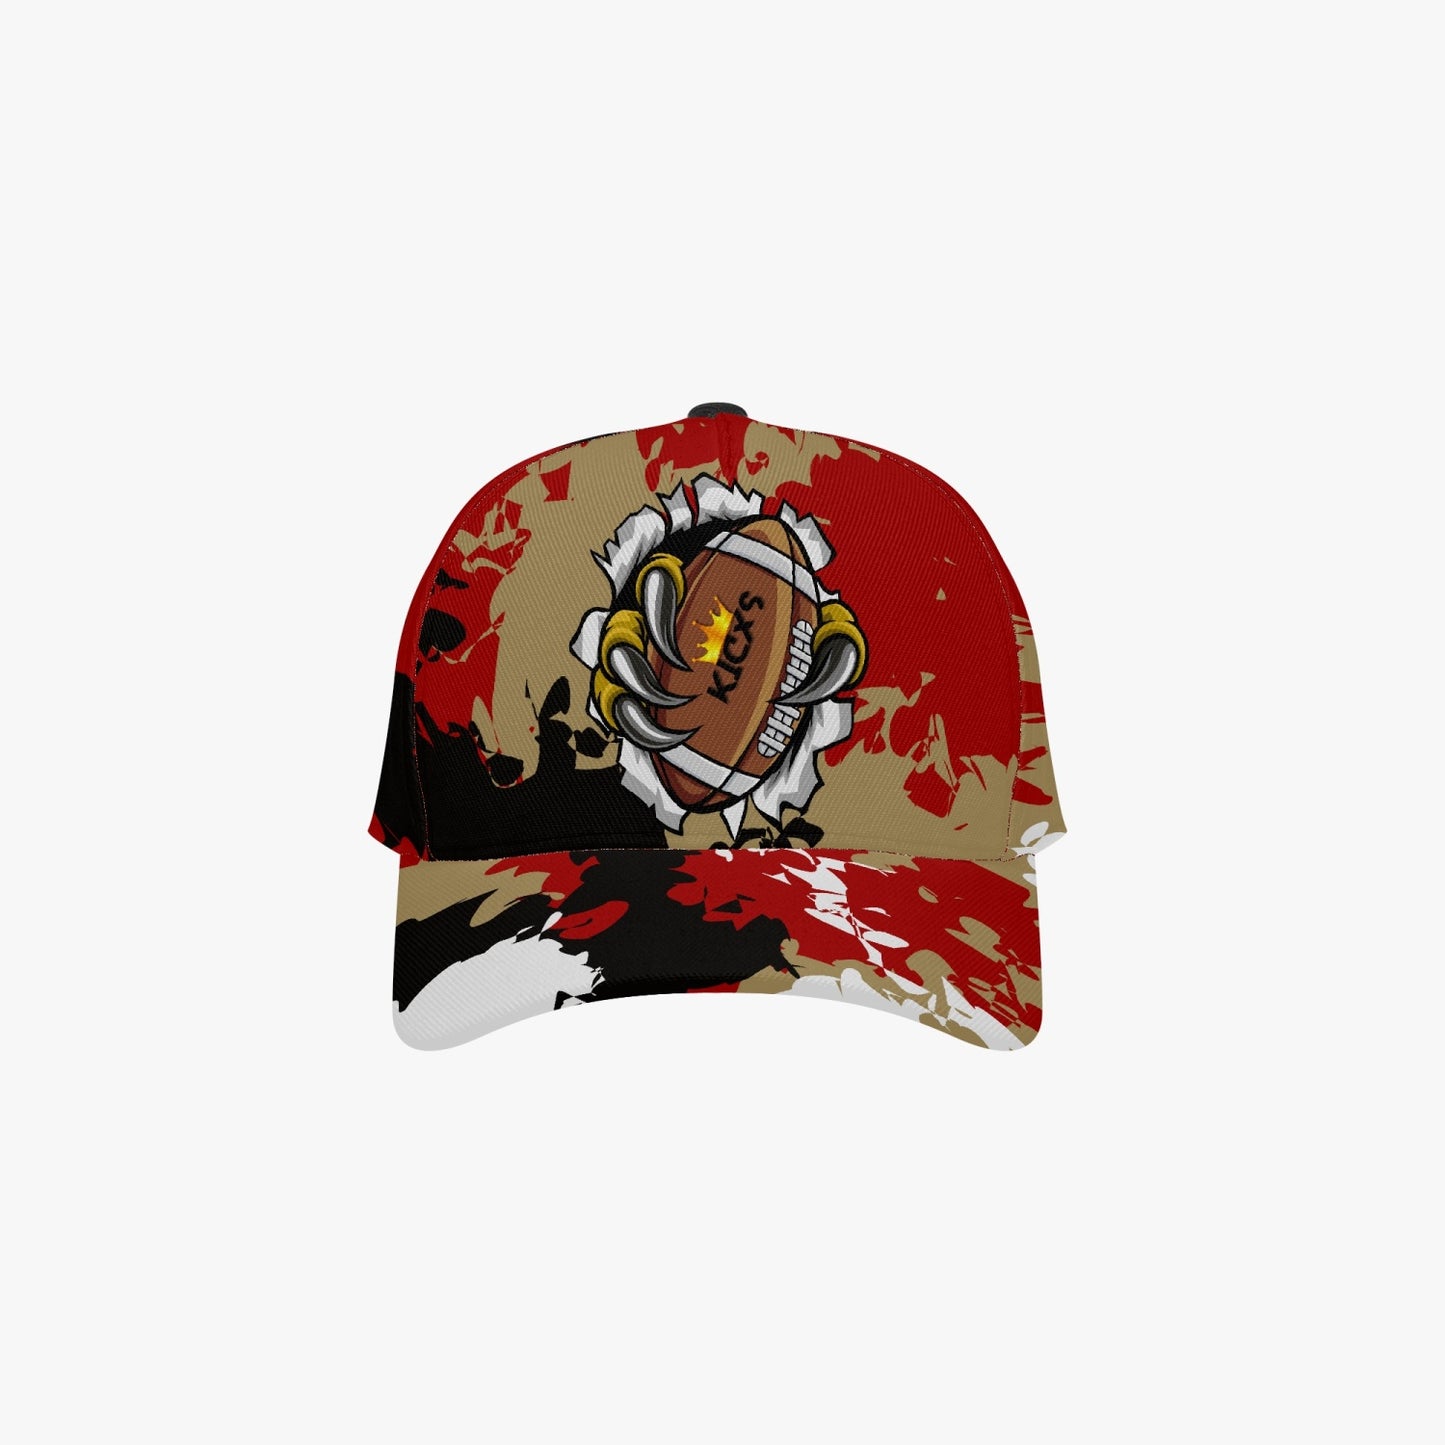 Kicxs Forty-Niners Camouflage Cap